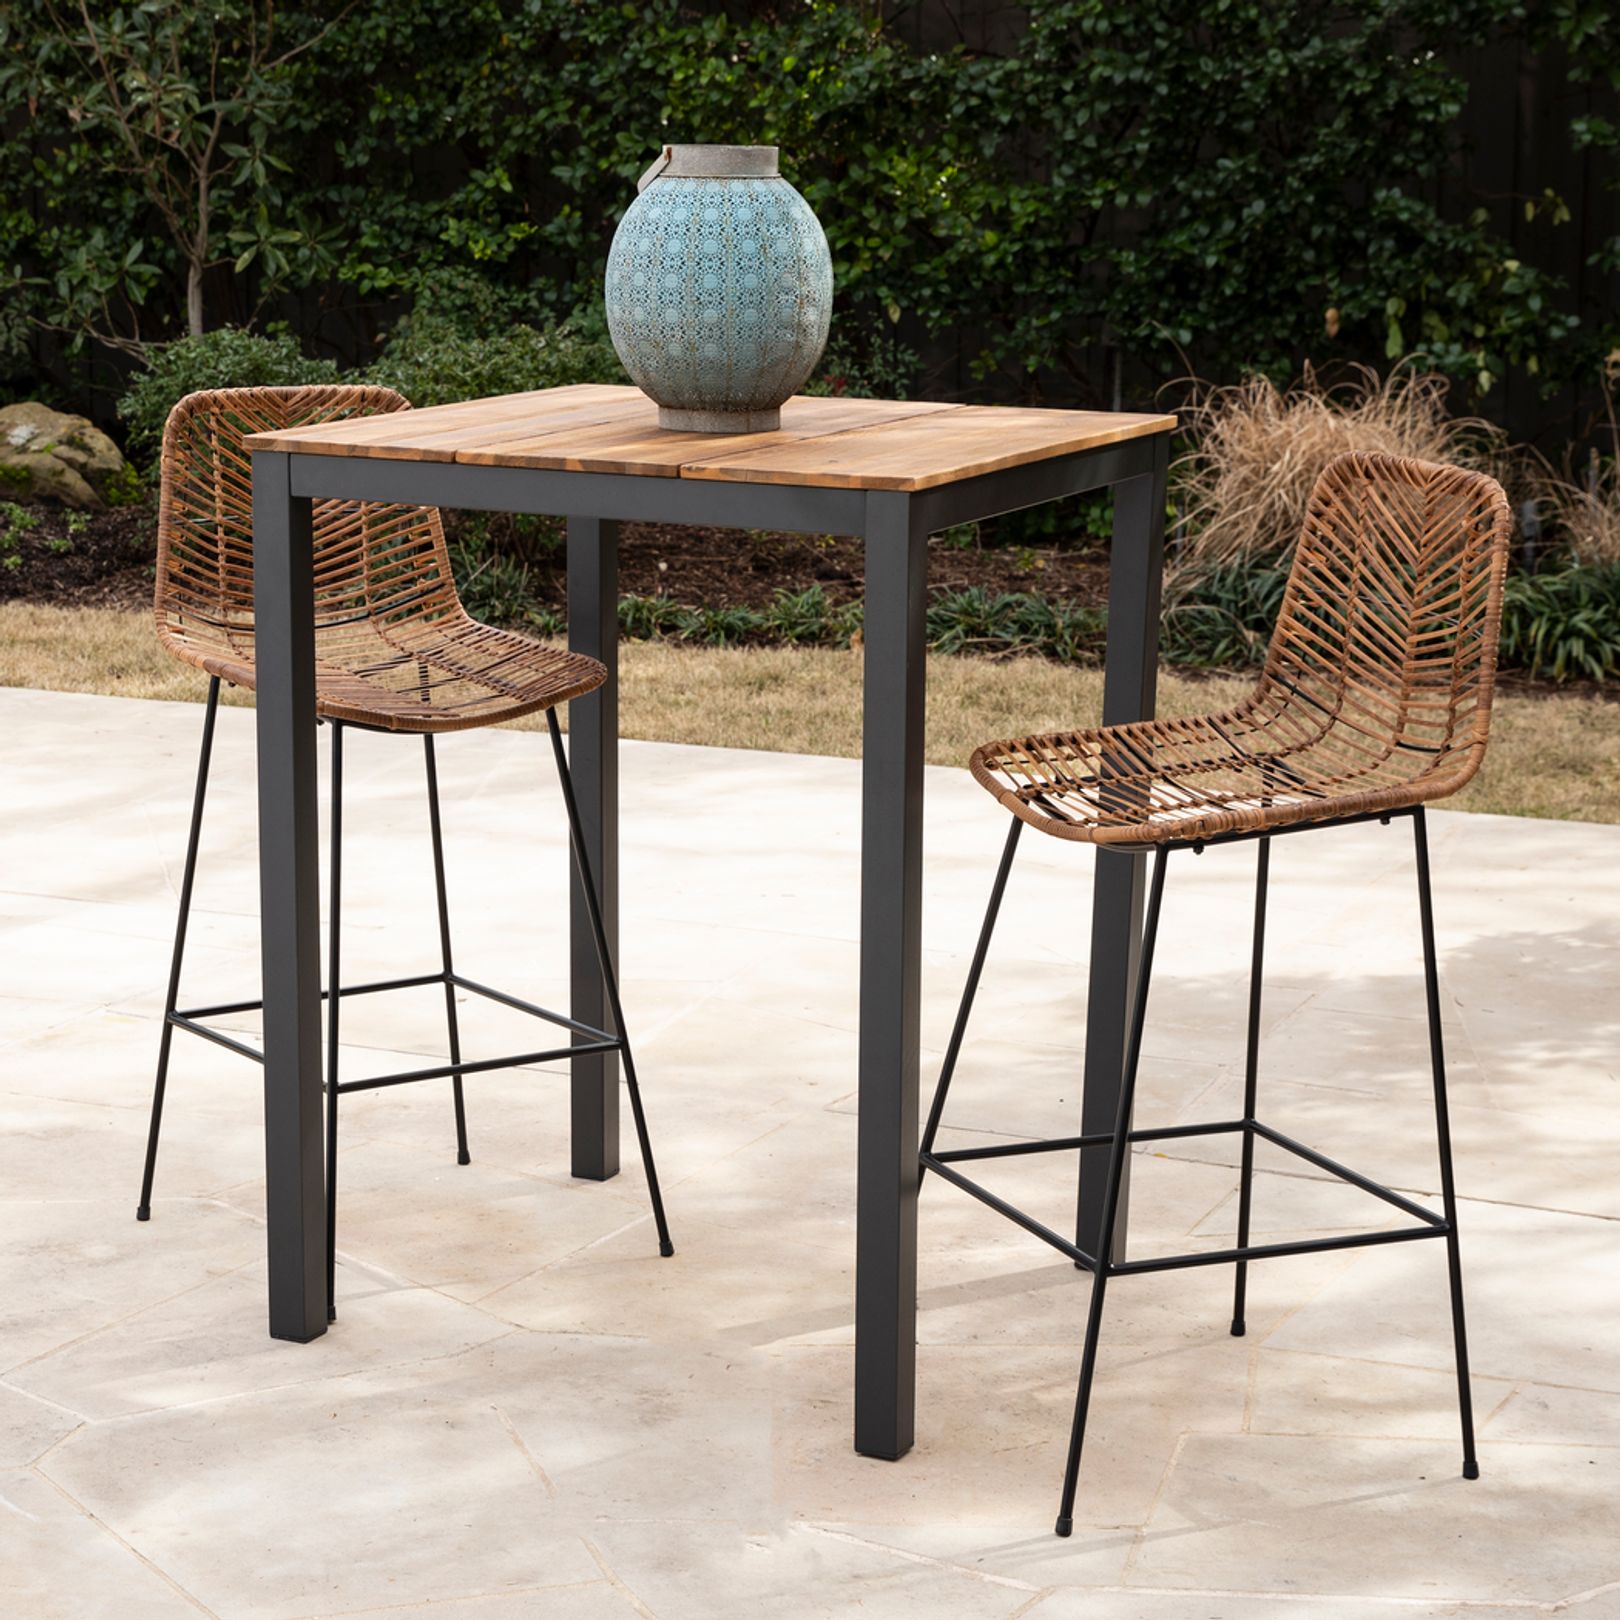 Photo of a wooden bar height table and two metal chairs with rattan seats